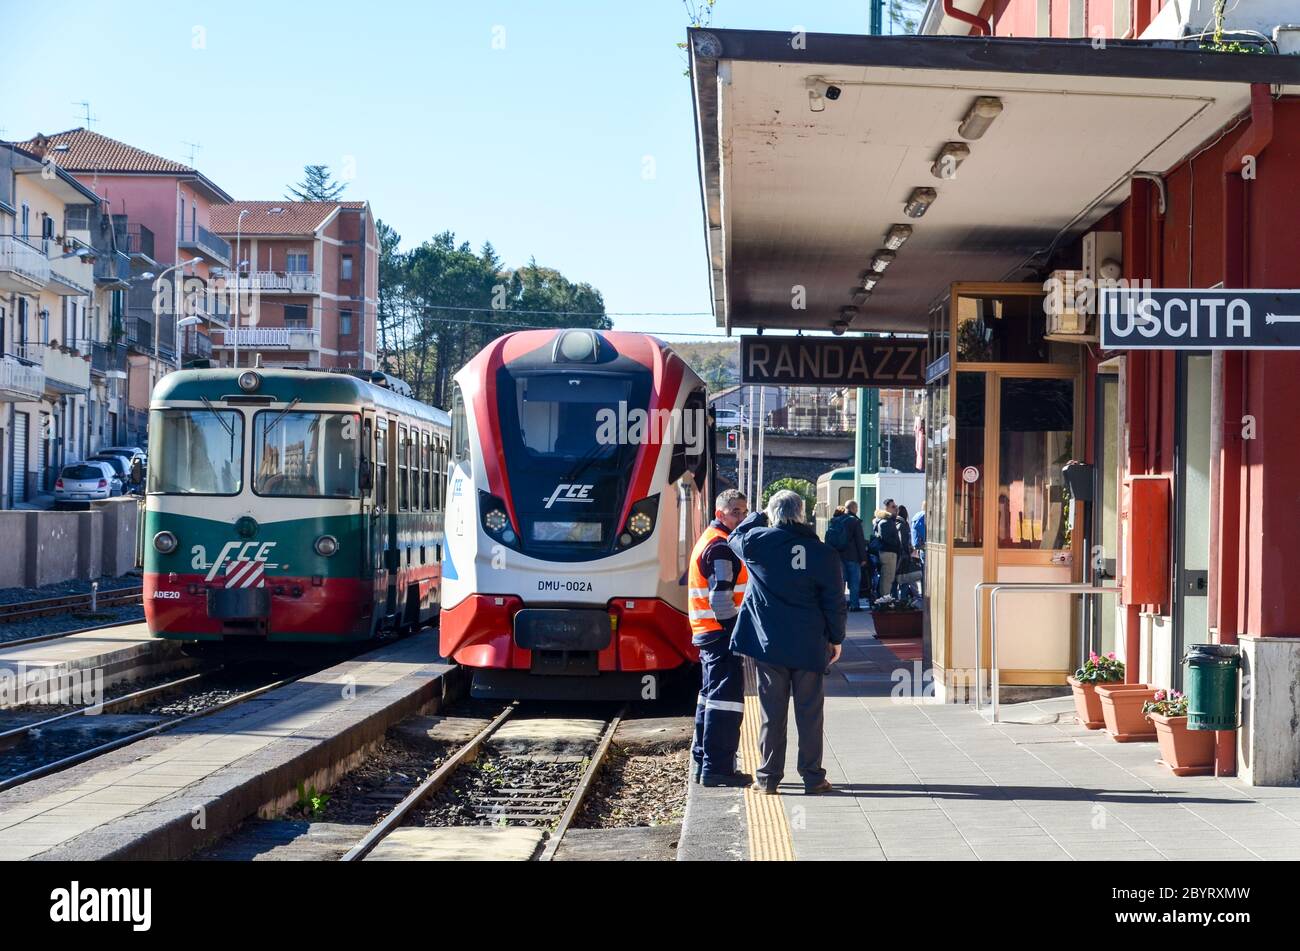 FCE old and modern trains, at the train station of Randazzo, along the Ferrovia Circumetnea, train line around the Mount Etna, Sicily, Italy Stock Photo